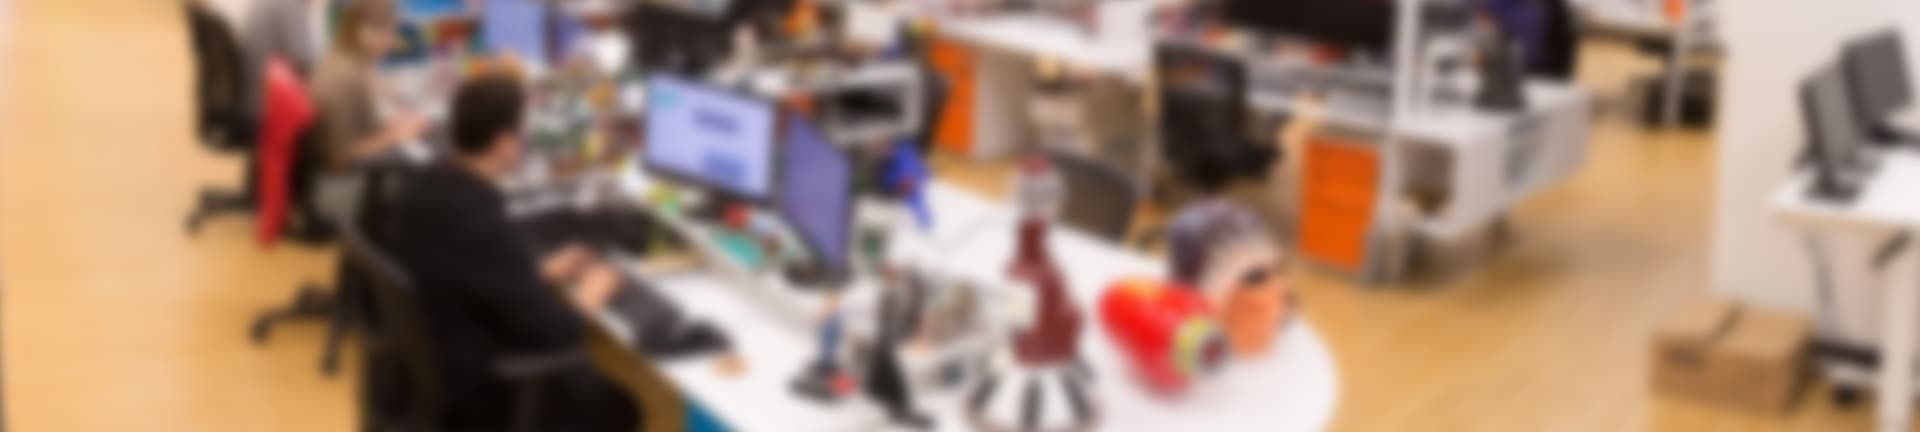 A blurred background image from inside the FUN.com offices